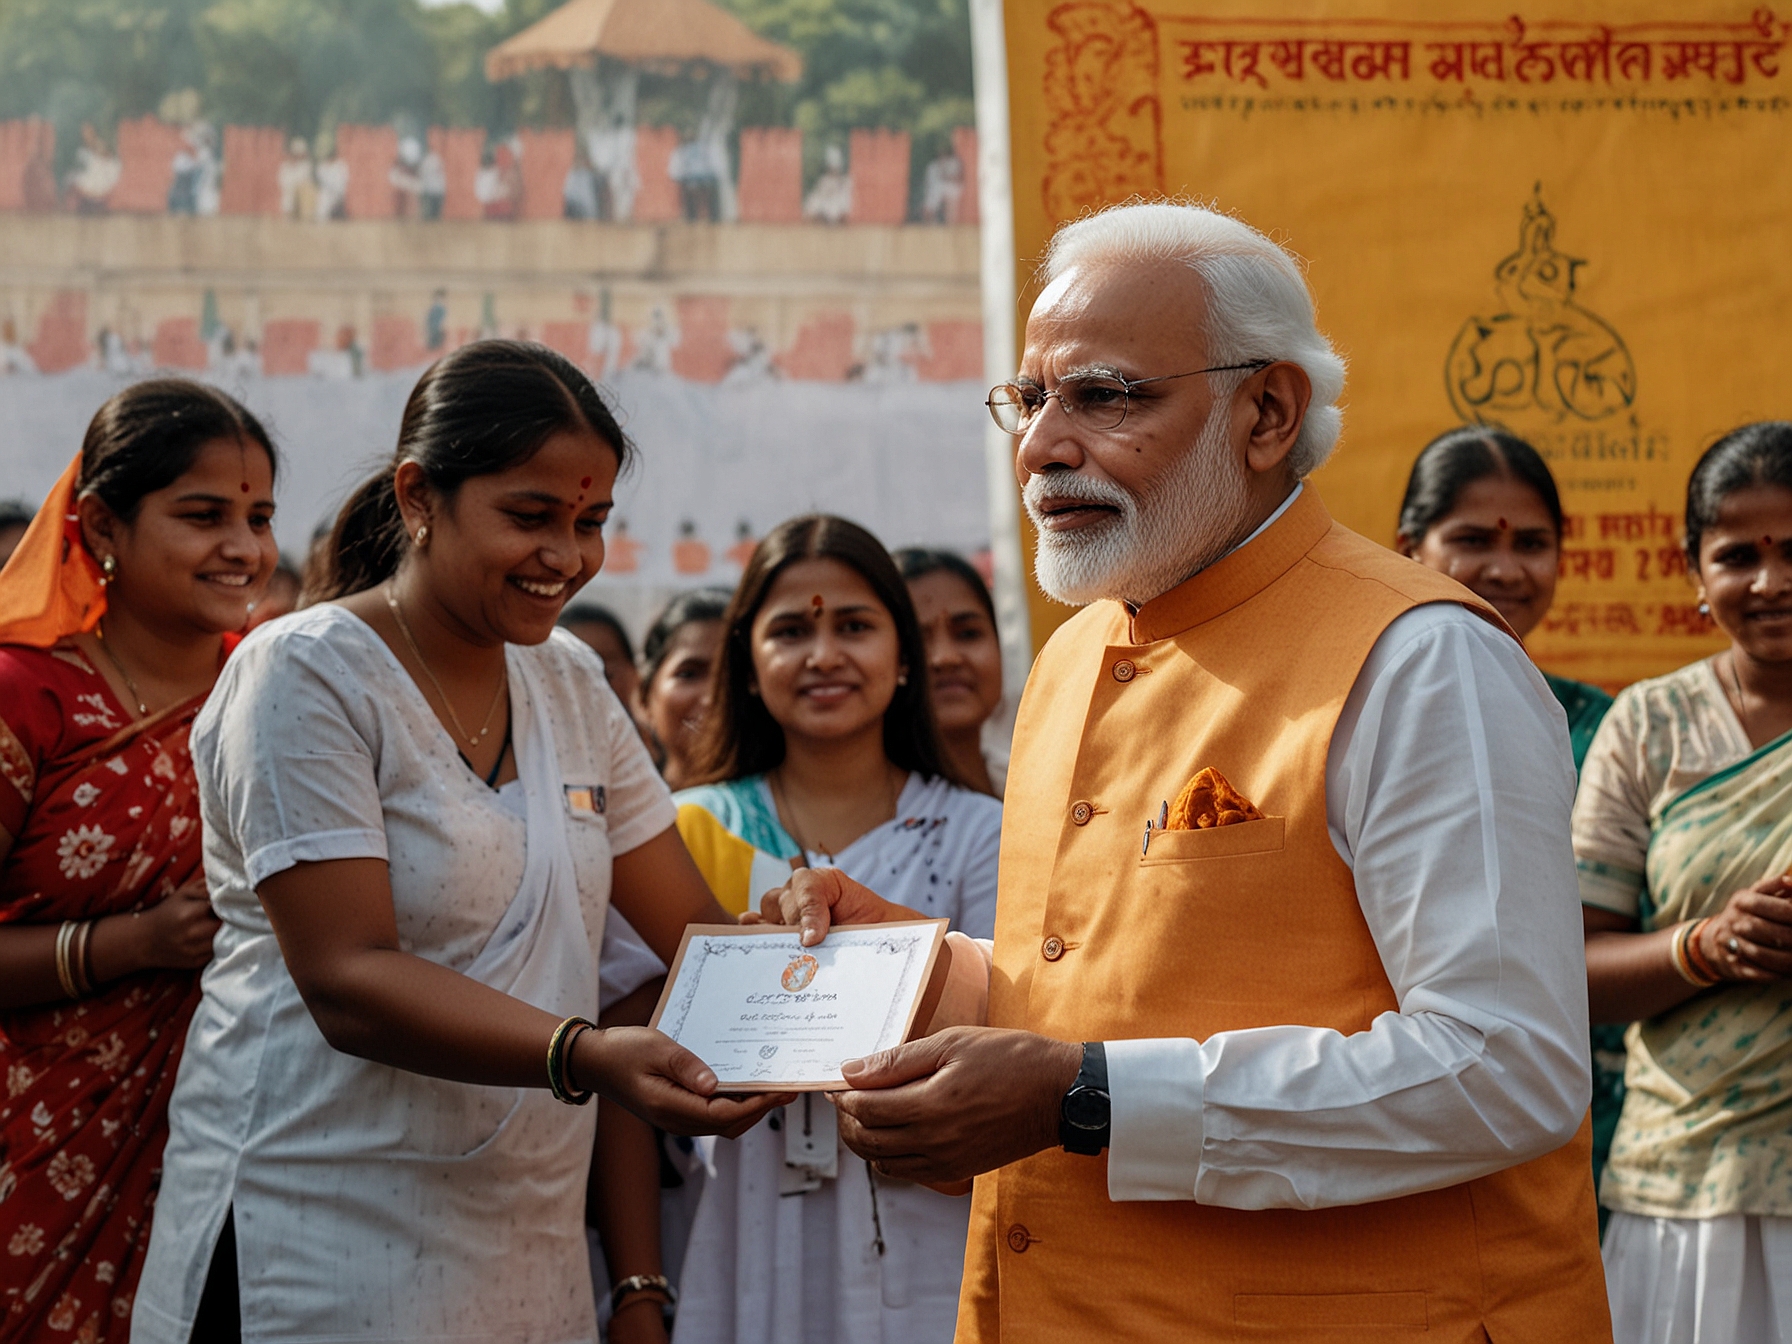 PM Modi presenting certificates to over 30,000 women from self-help groups at the PM Kisan Samman Sammelan in Varanasi, symbolizing women's financial independence and empowerment.